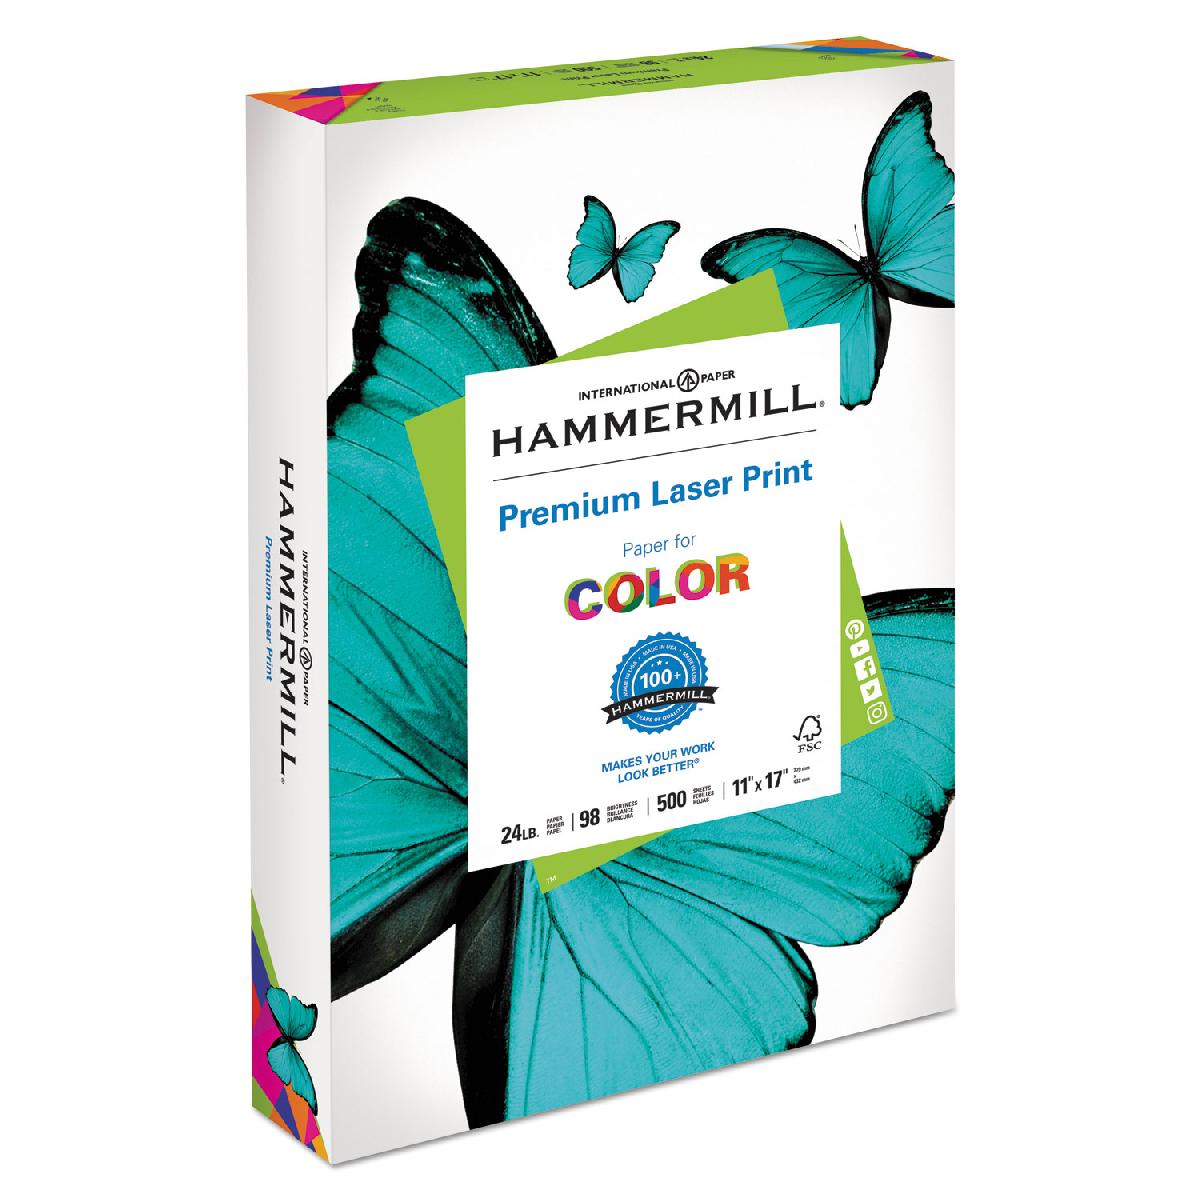 Hammermill® Laser Print Radiant White Smooth 24 lb. Paper 11x17 in. 2500 Sheets